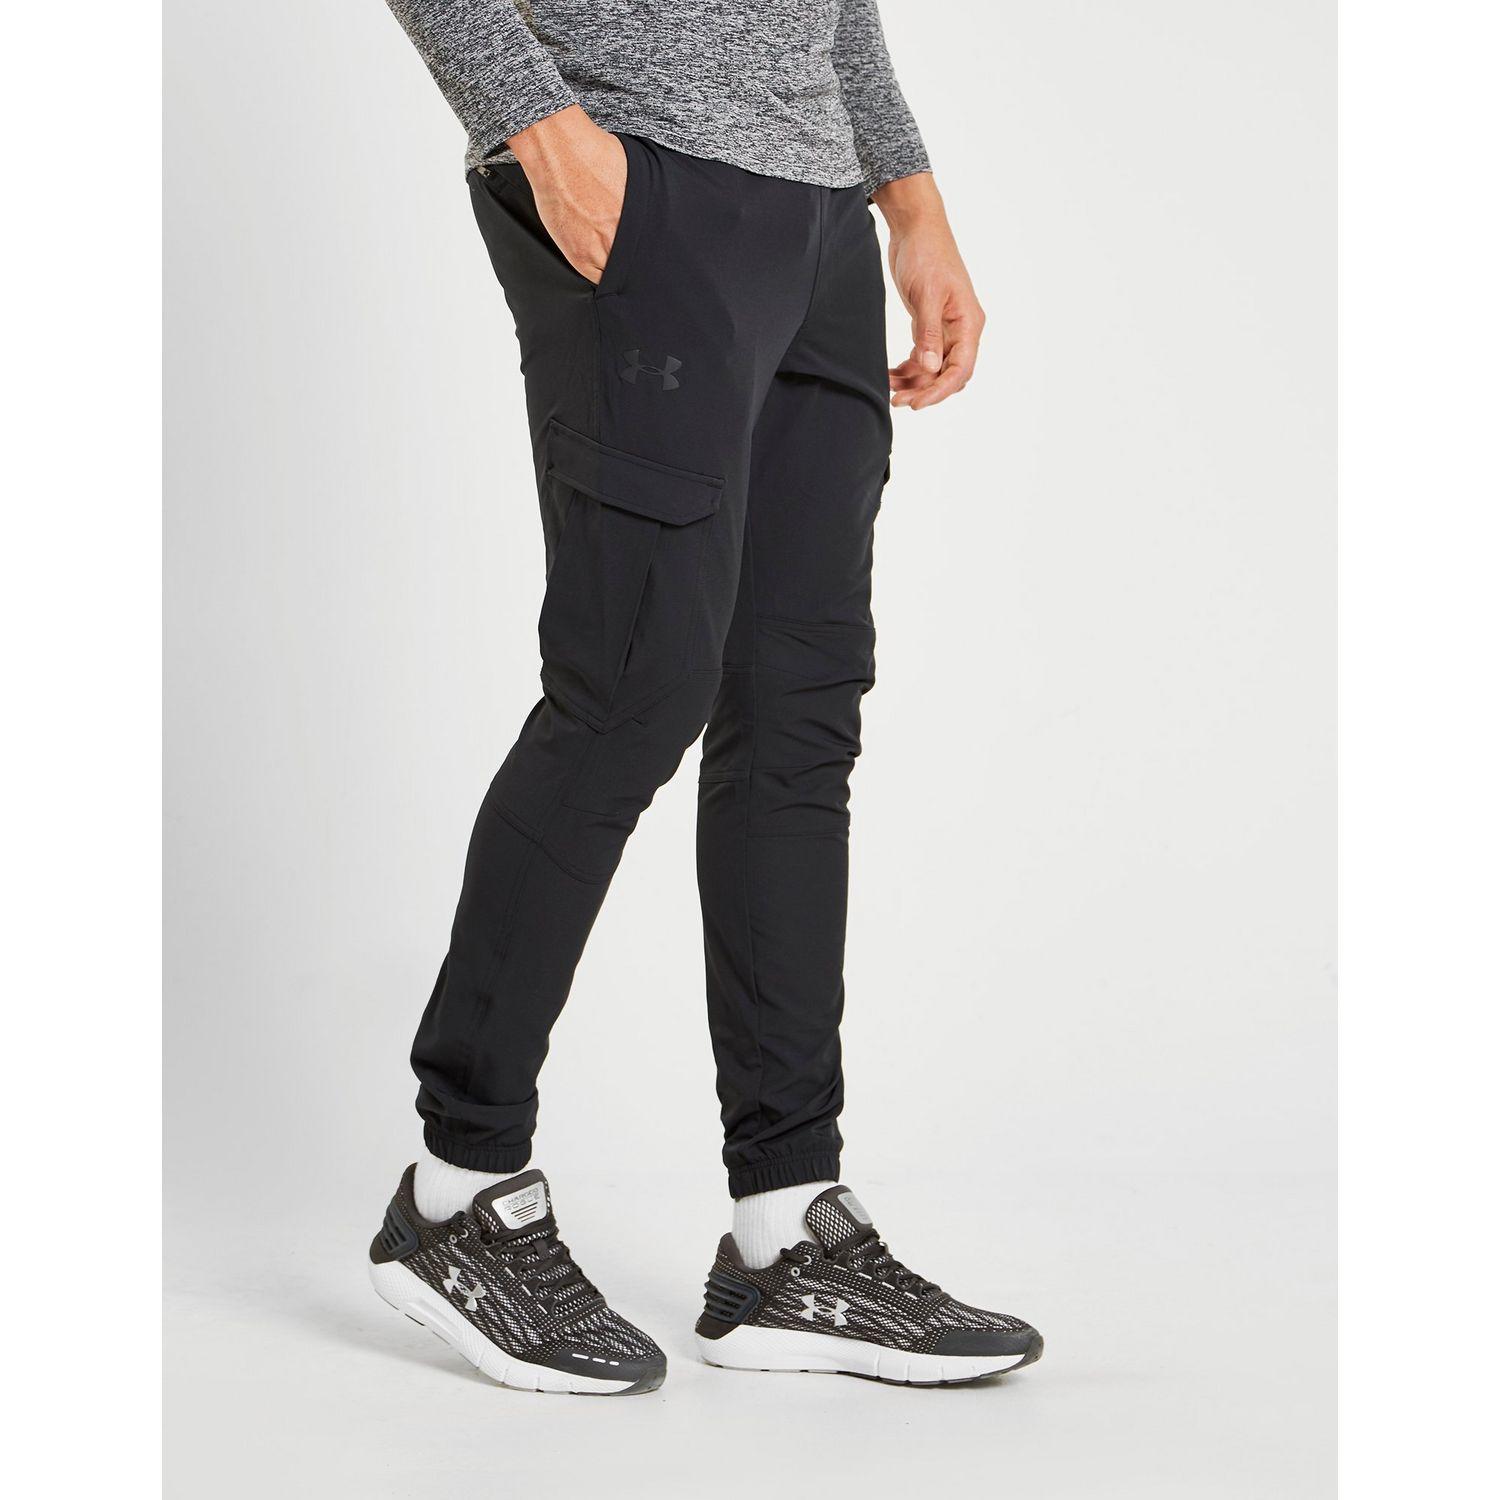 Under Armour Wg Woven Cargo Track Pants Clearance, 55% OFF |  www.colegiogamarra.com